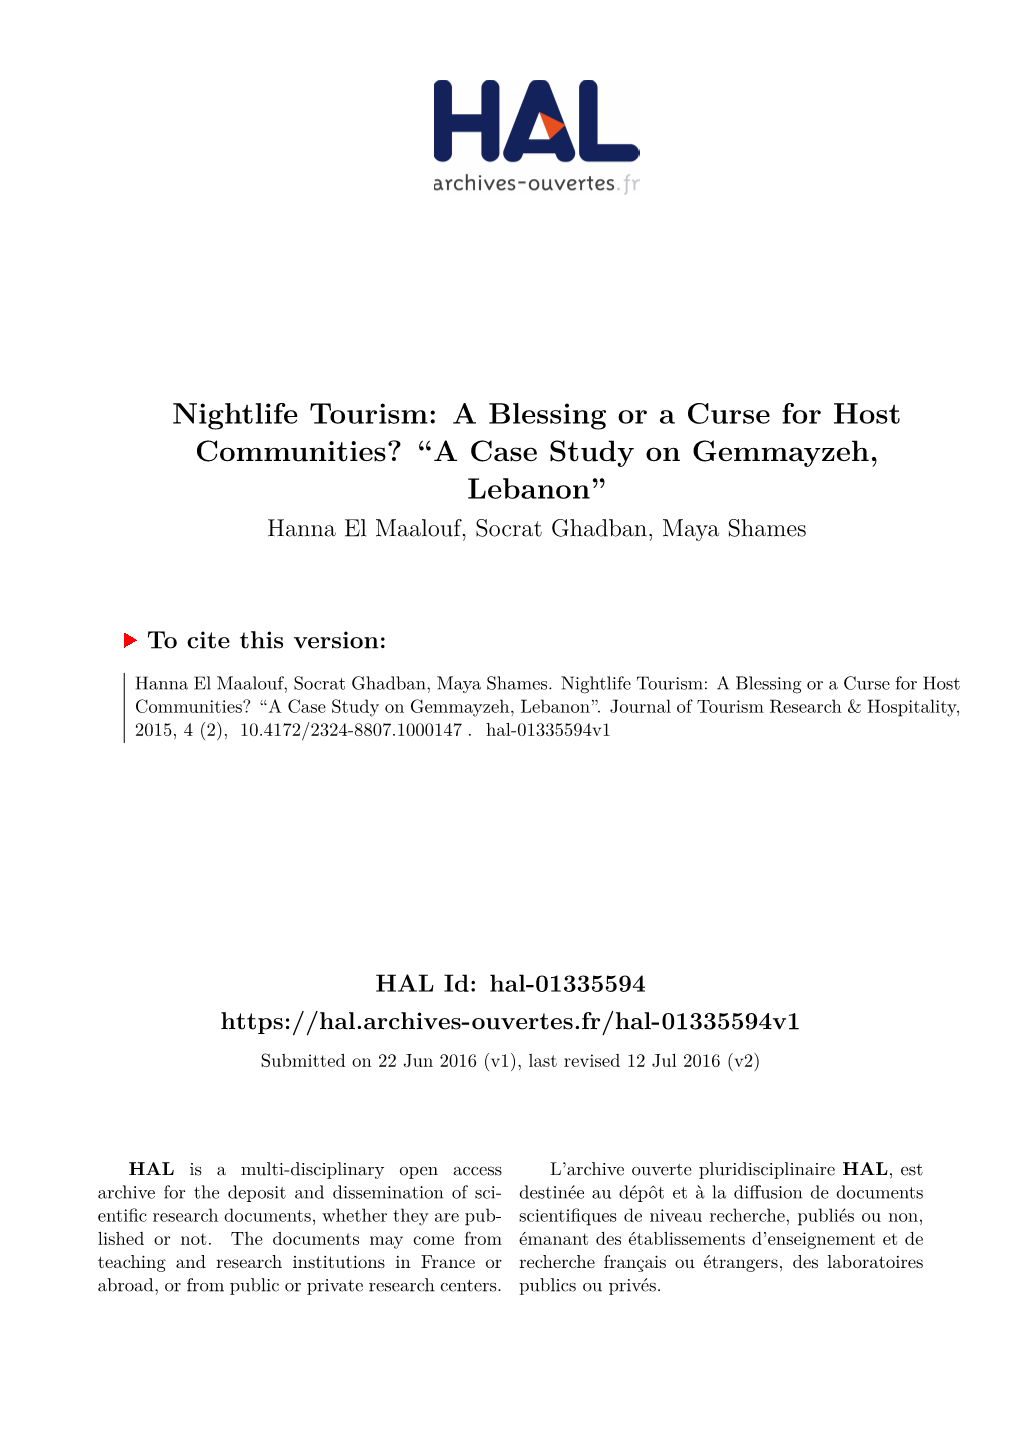 Nightlife Tourism: a Blessing Or a Curse for Host Communities? ``A Case Study on Gemmayzeh, Lebanon''